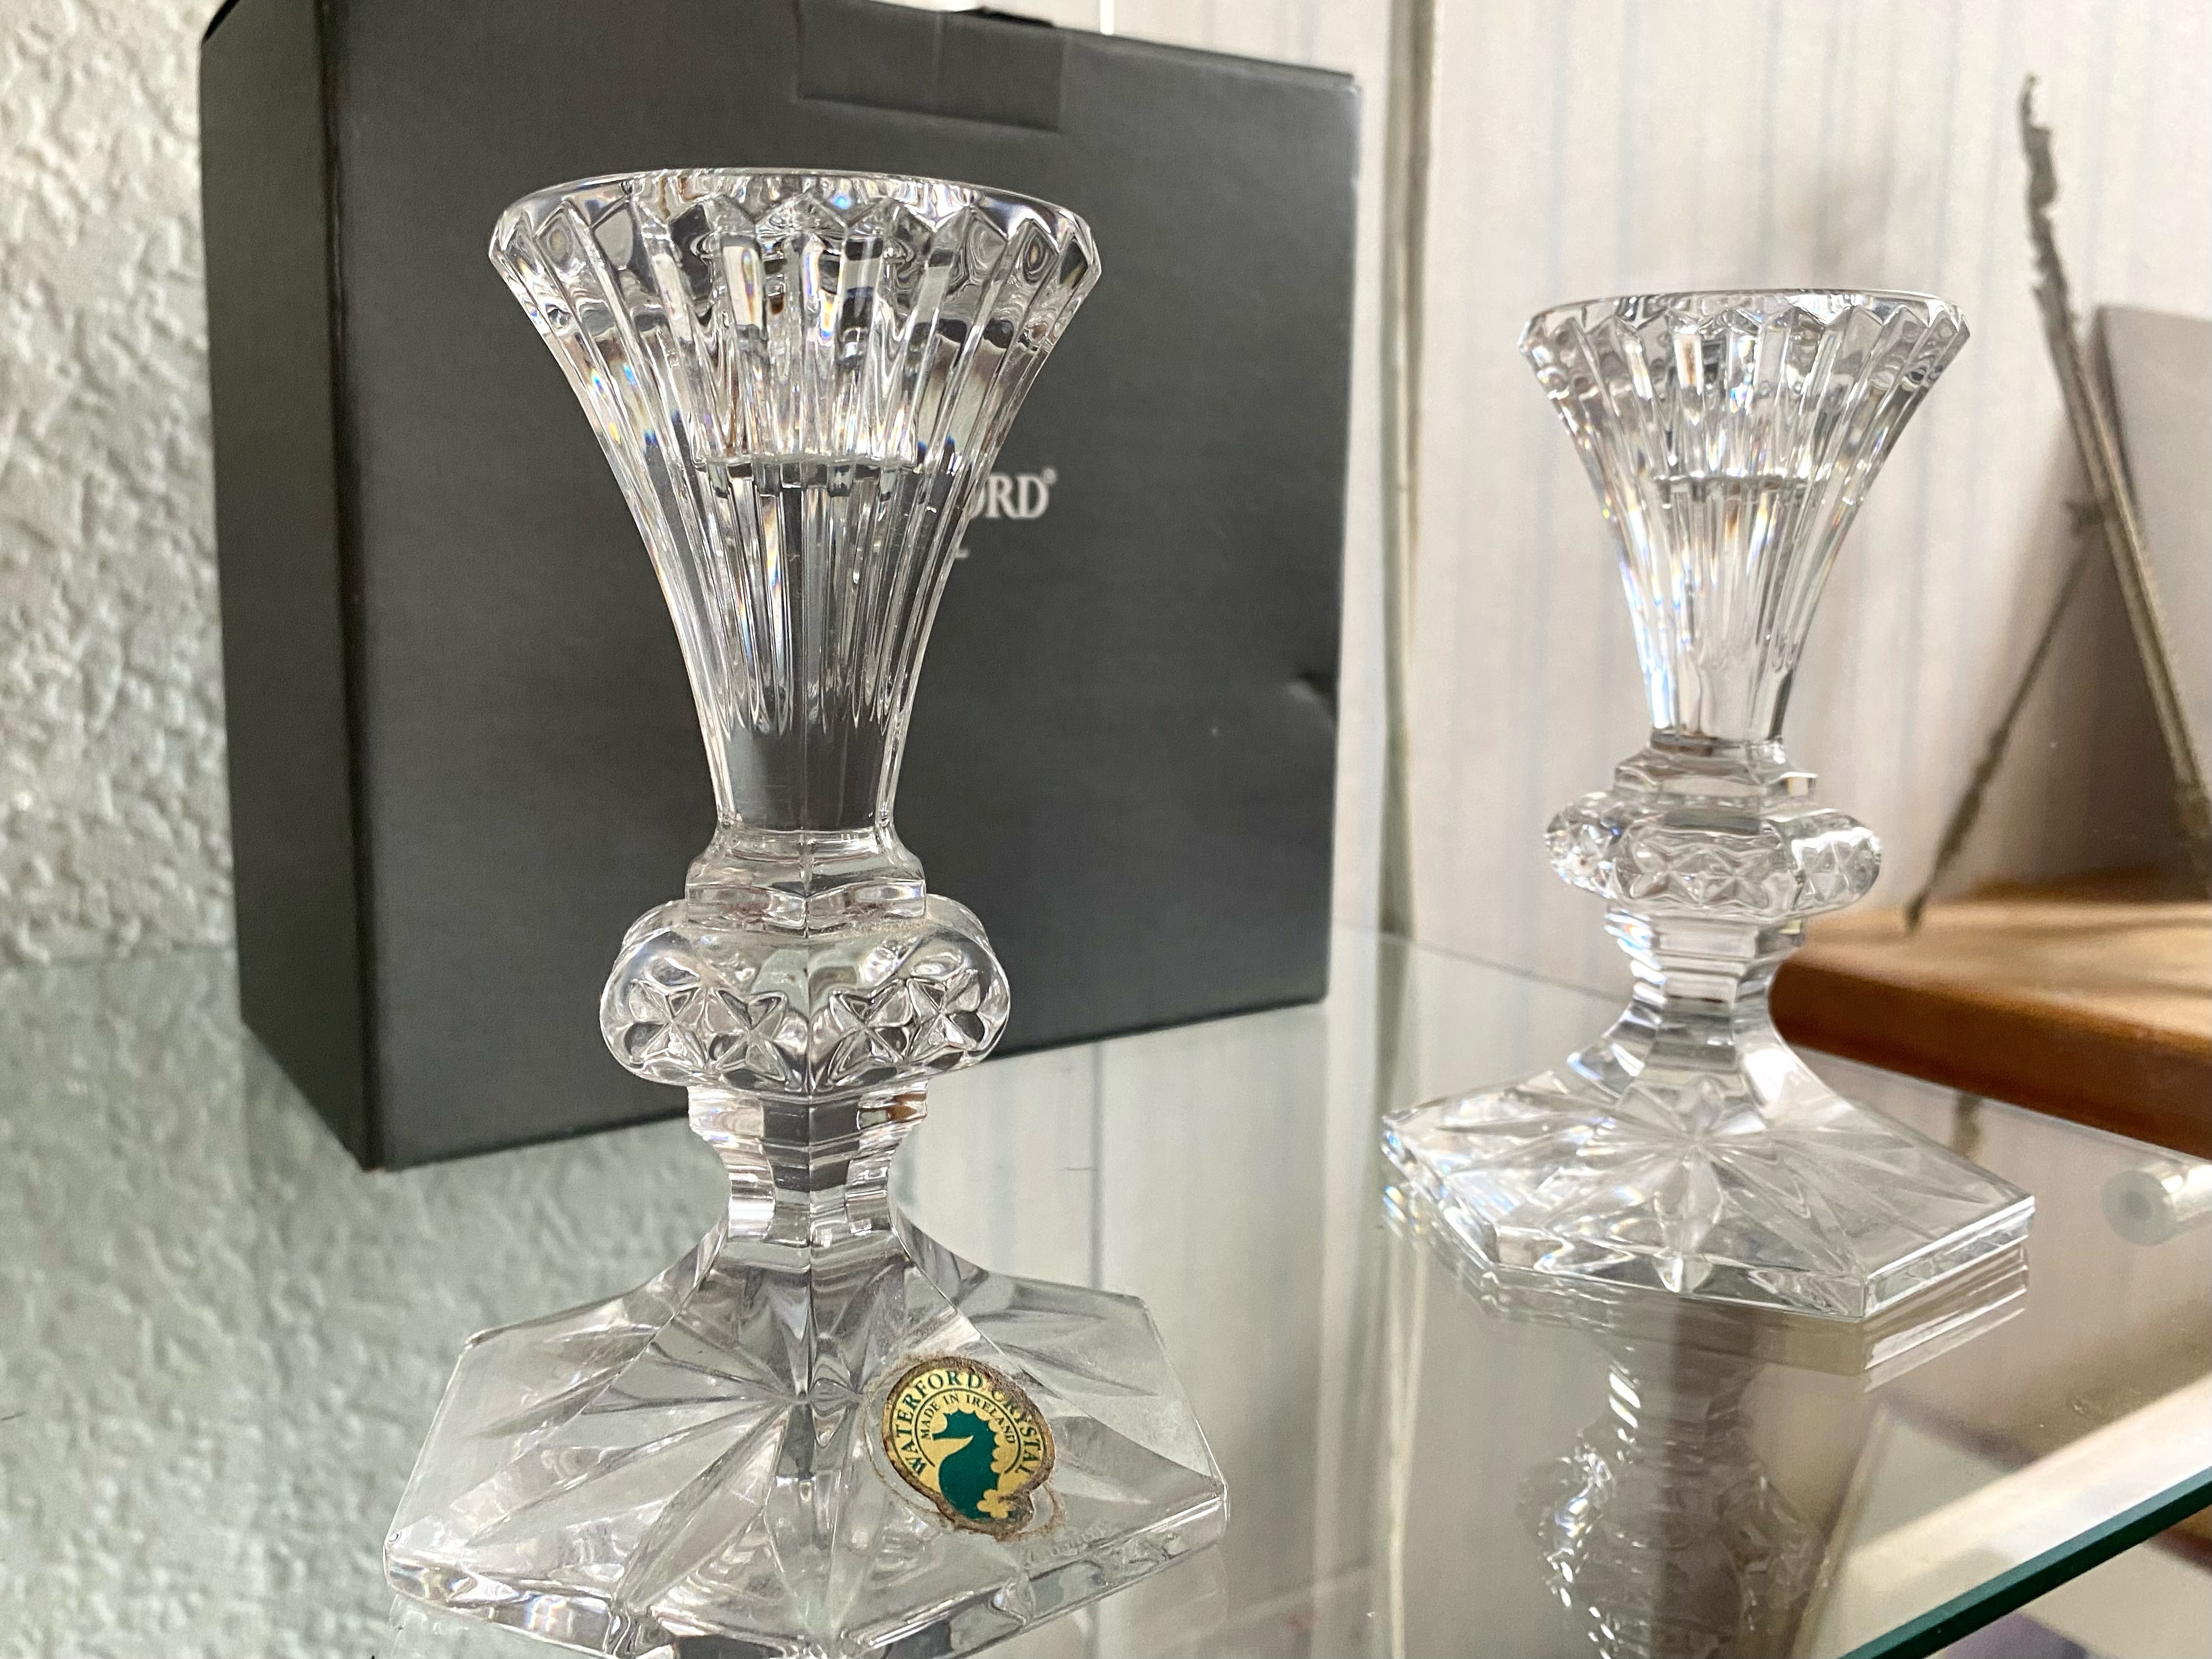 A Pair of Waterford Crystal Candlesticks, in original box, measure 5'' high. - Image 2 of 2